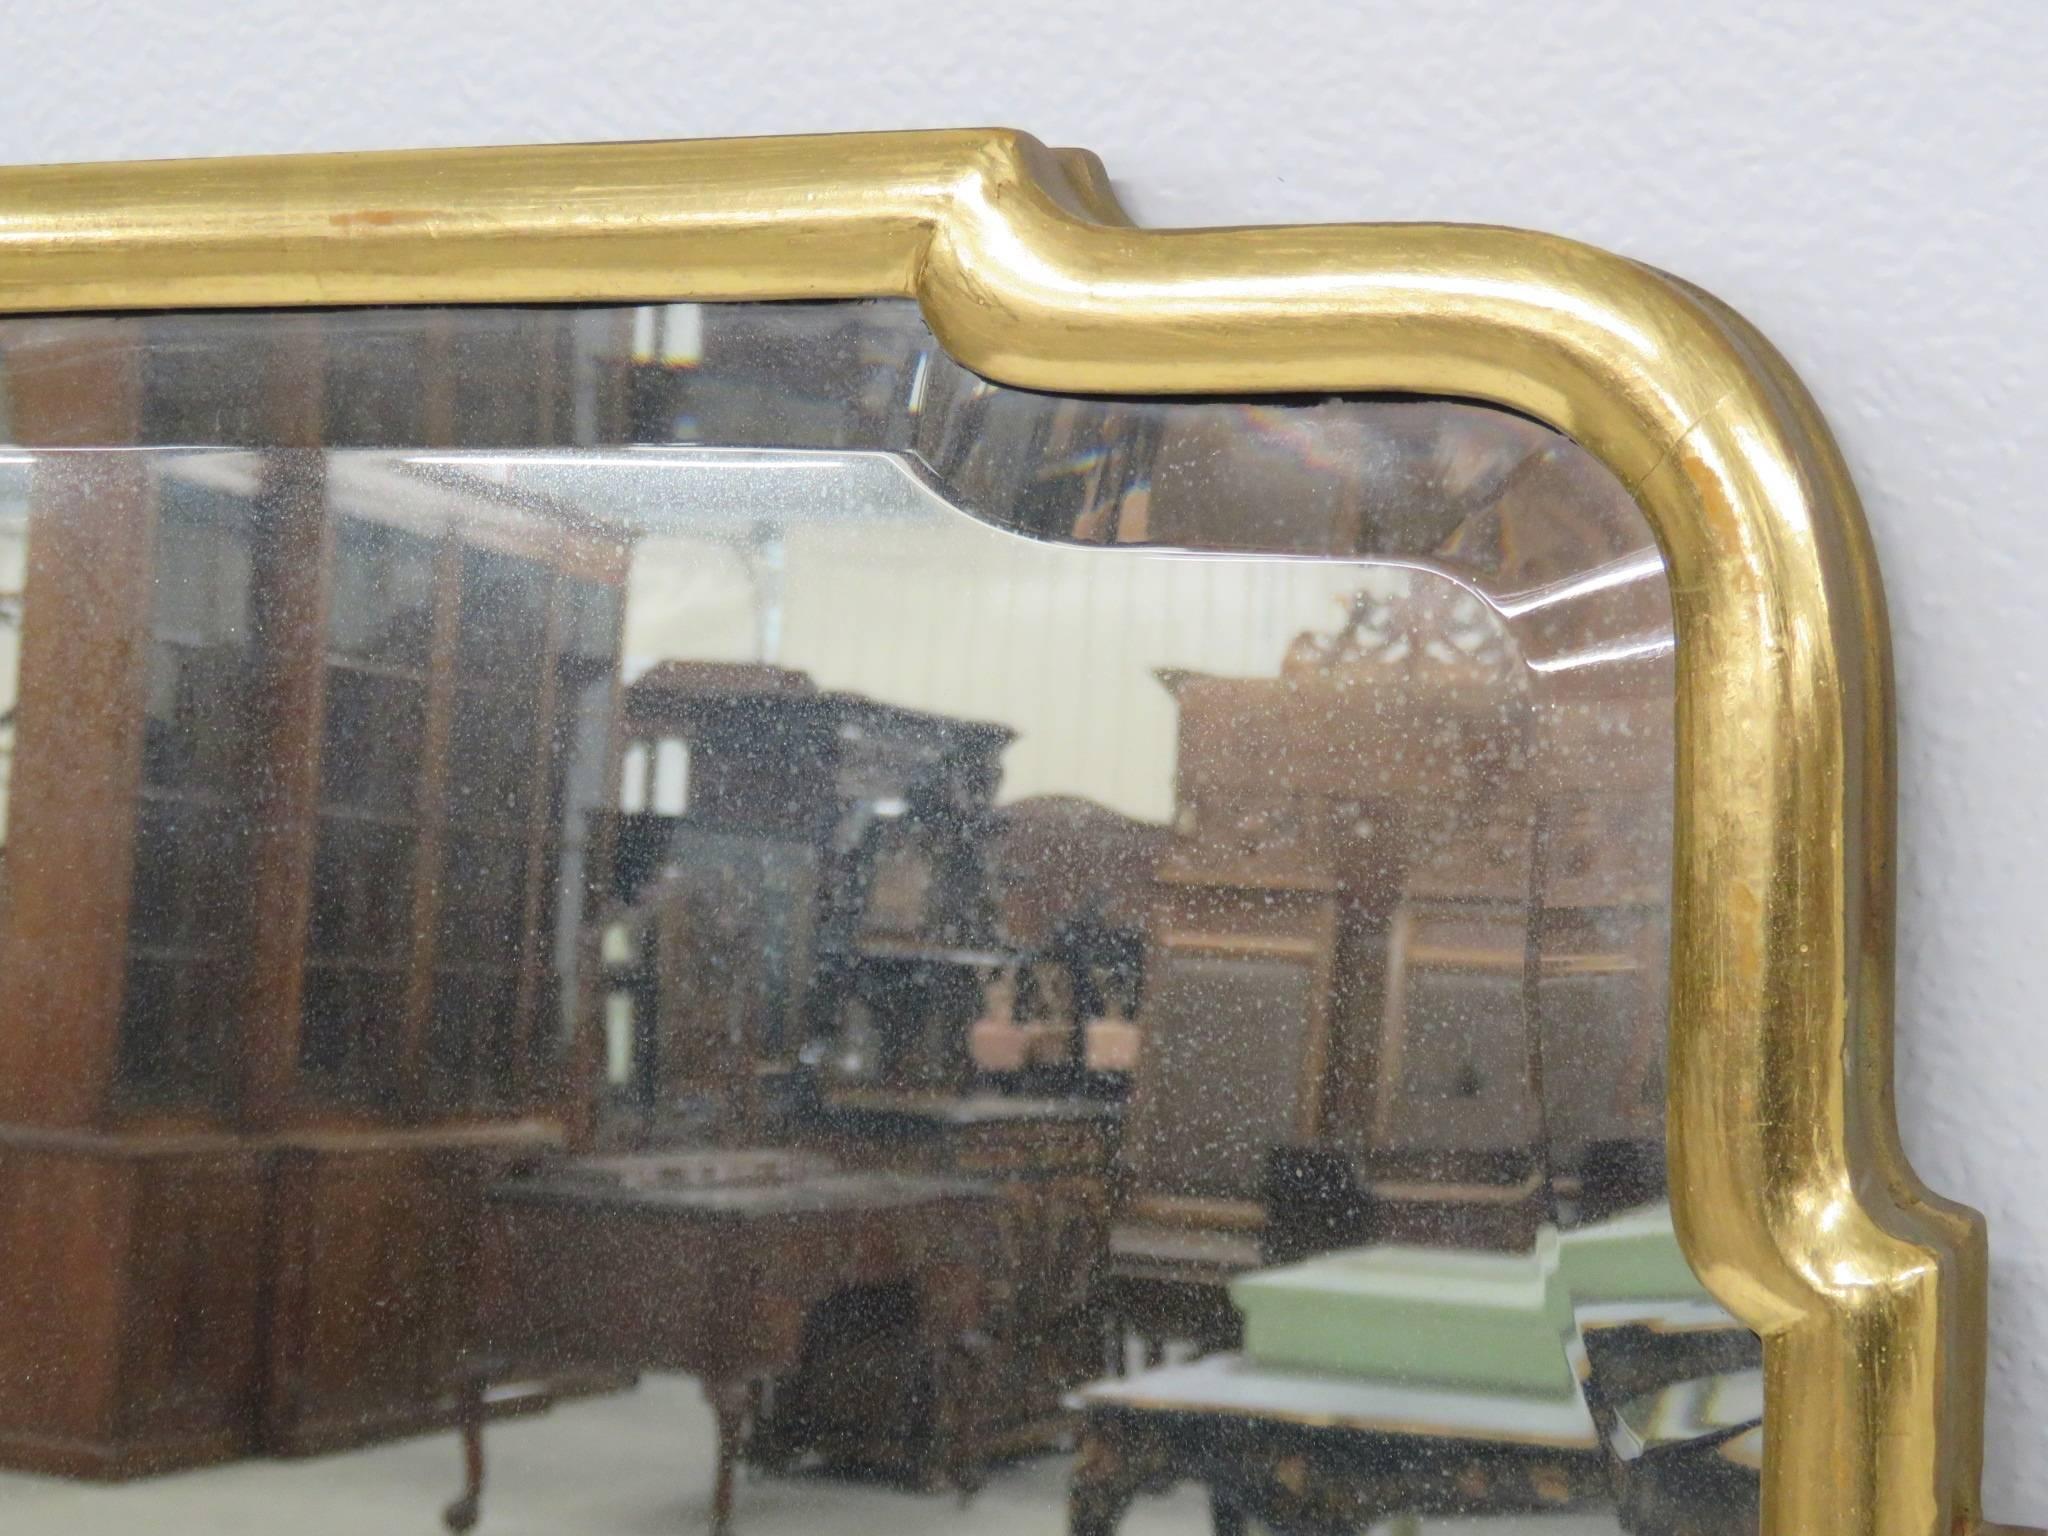 Mirrors have gilt frames with beveled split glass mirrors.